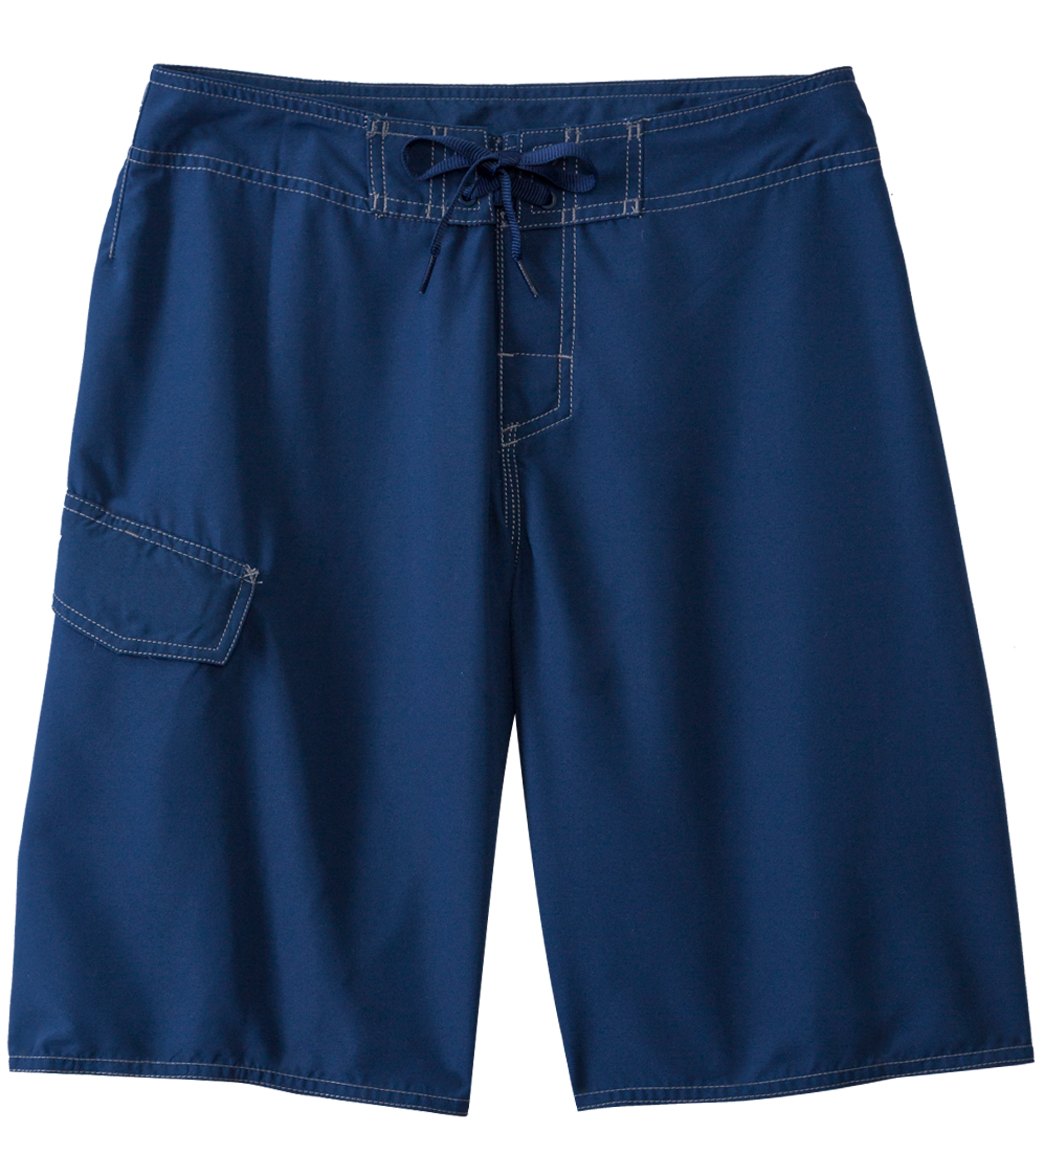 Dolfin Fitted Board Short - Navy 38 Polyester - Swimoutlet.com